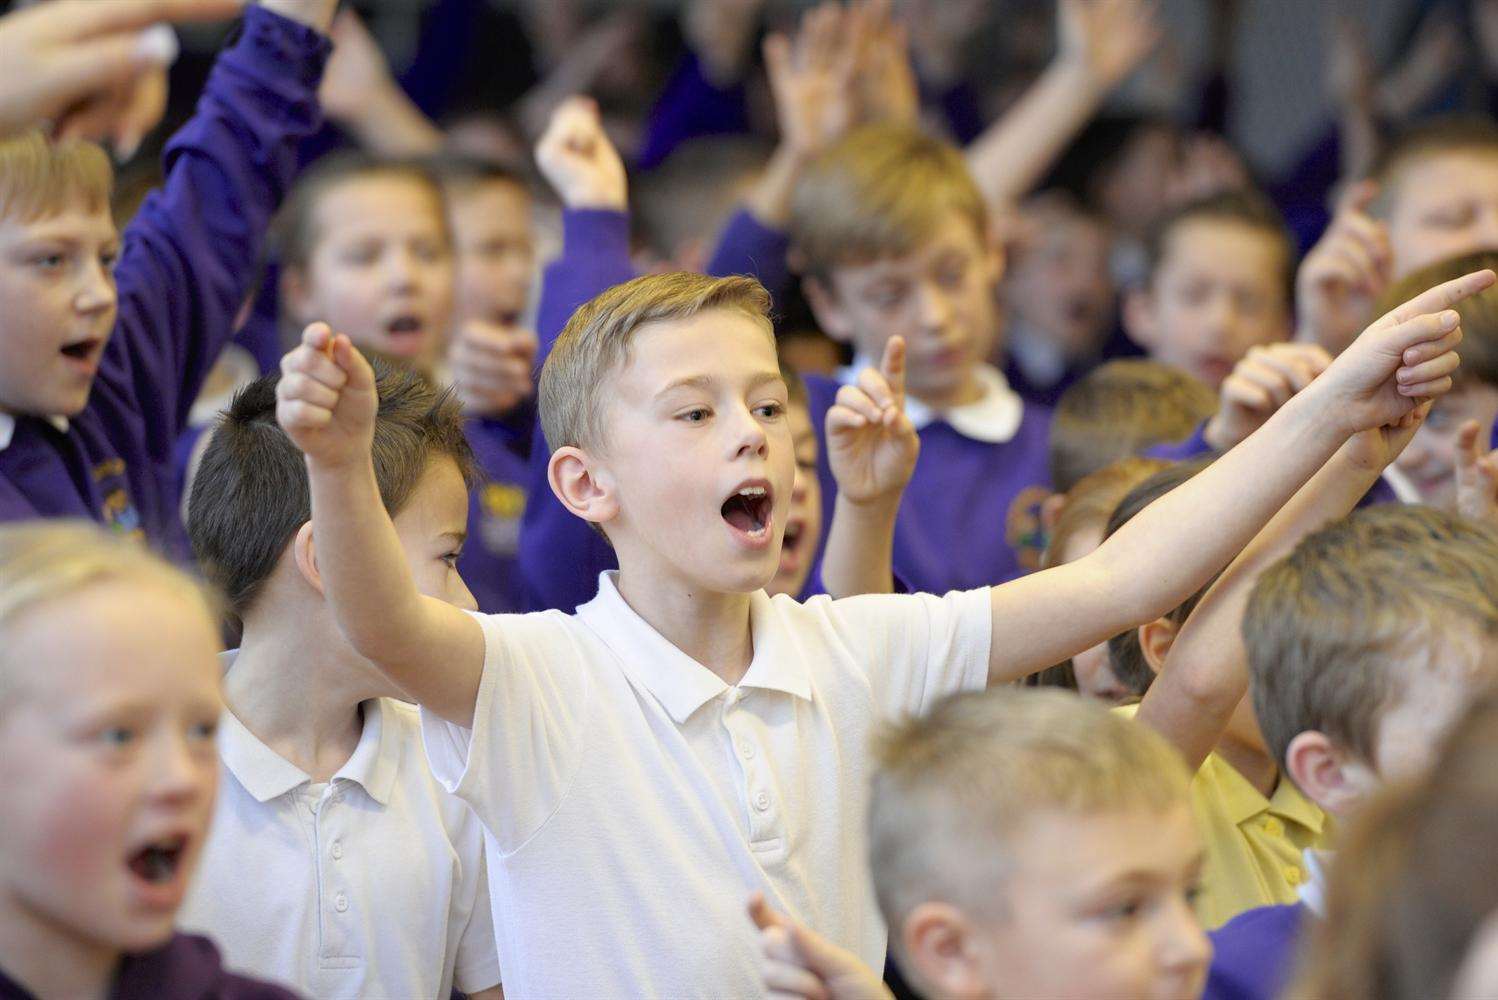 Children will be able to belt out the tunes at the free choir sessions